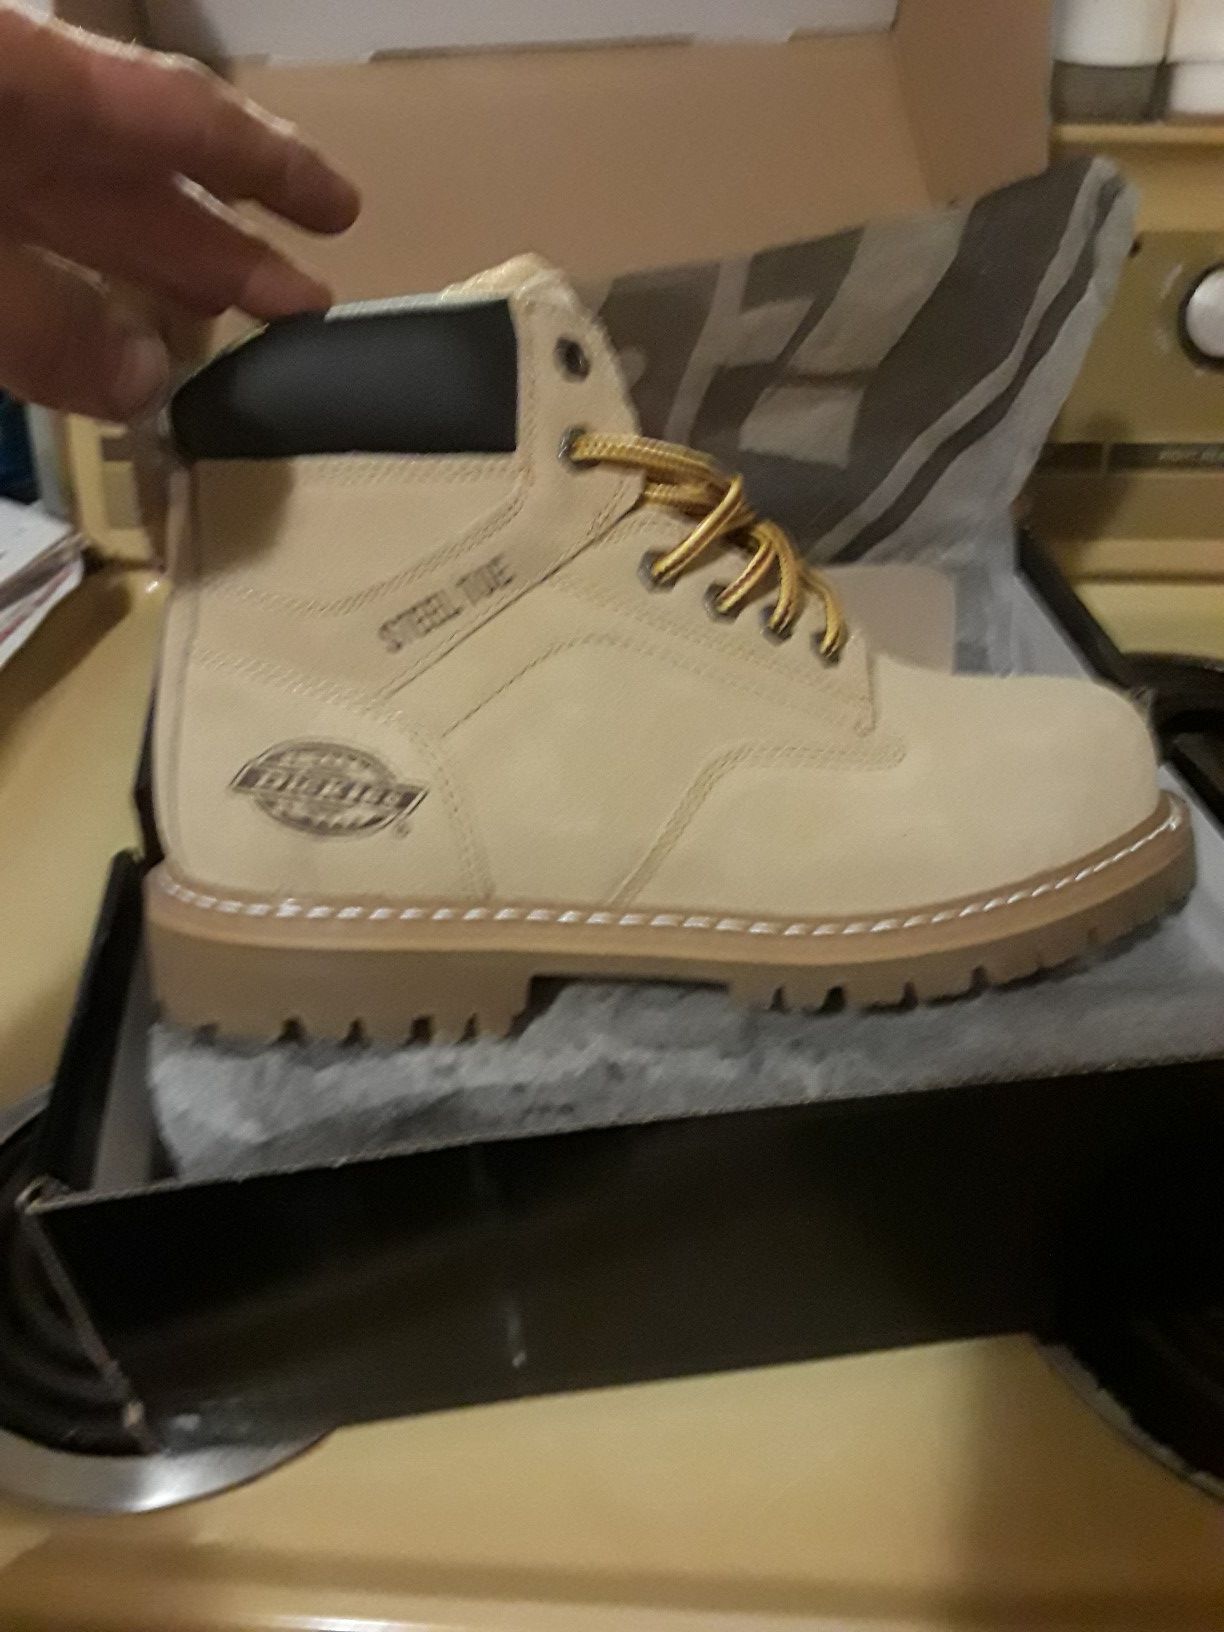 Brand new Dickies men's work boots Size 9